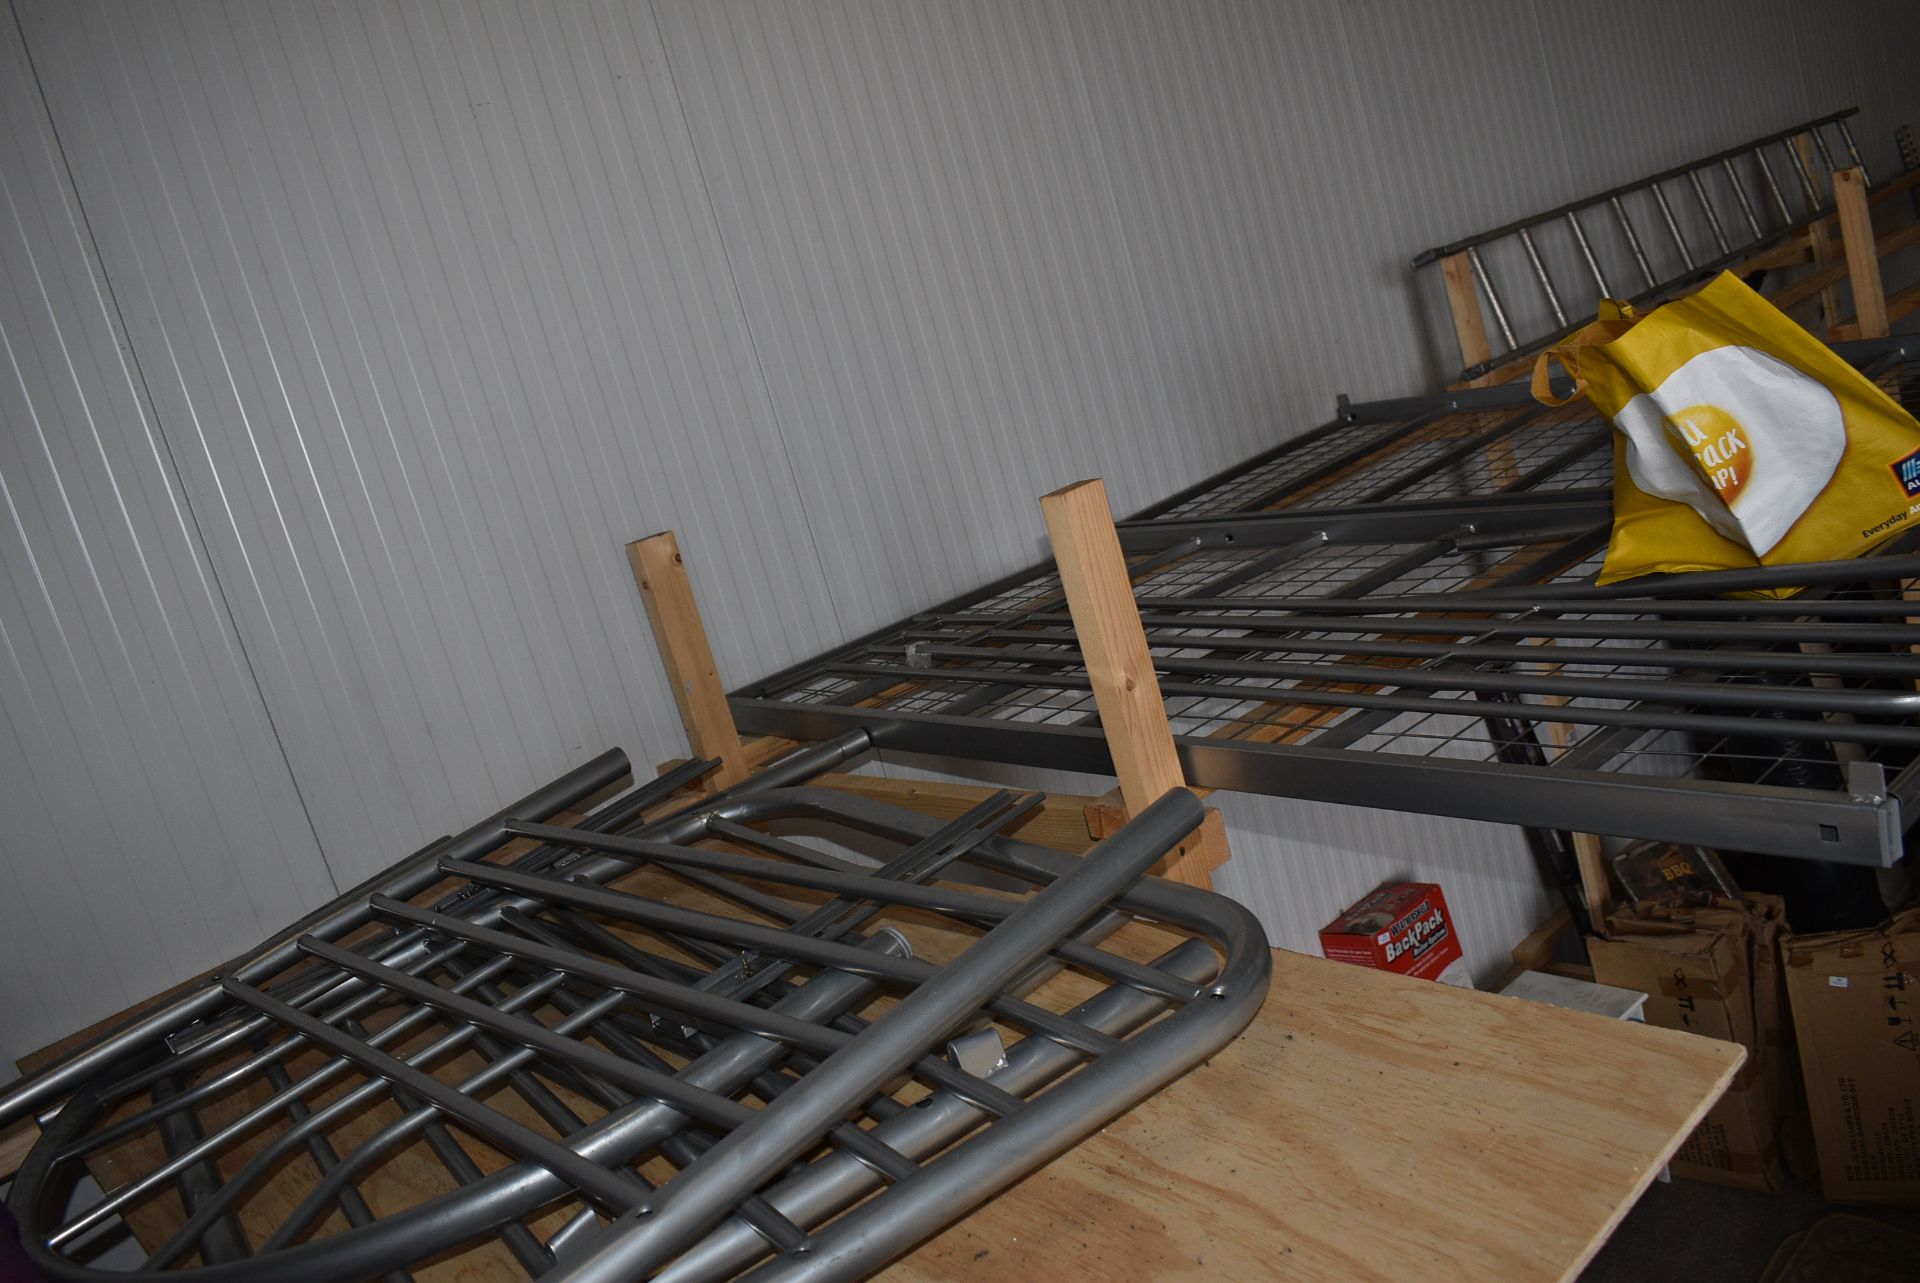 Disassembled Bunkbed - Image 2 of 4